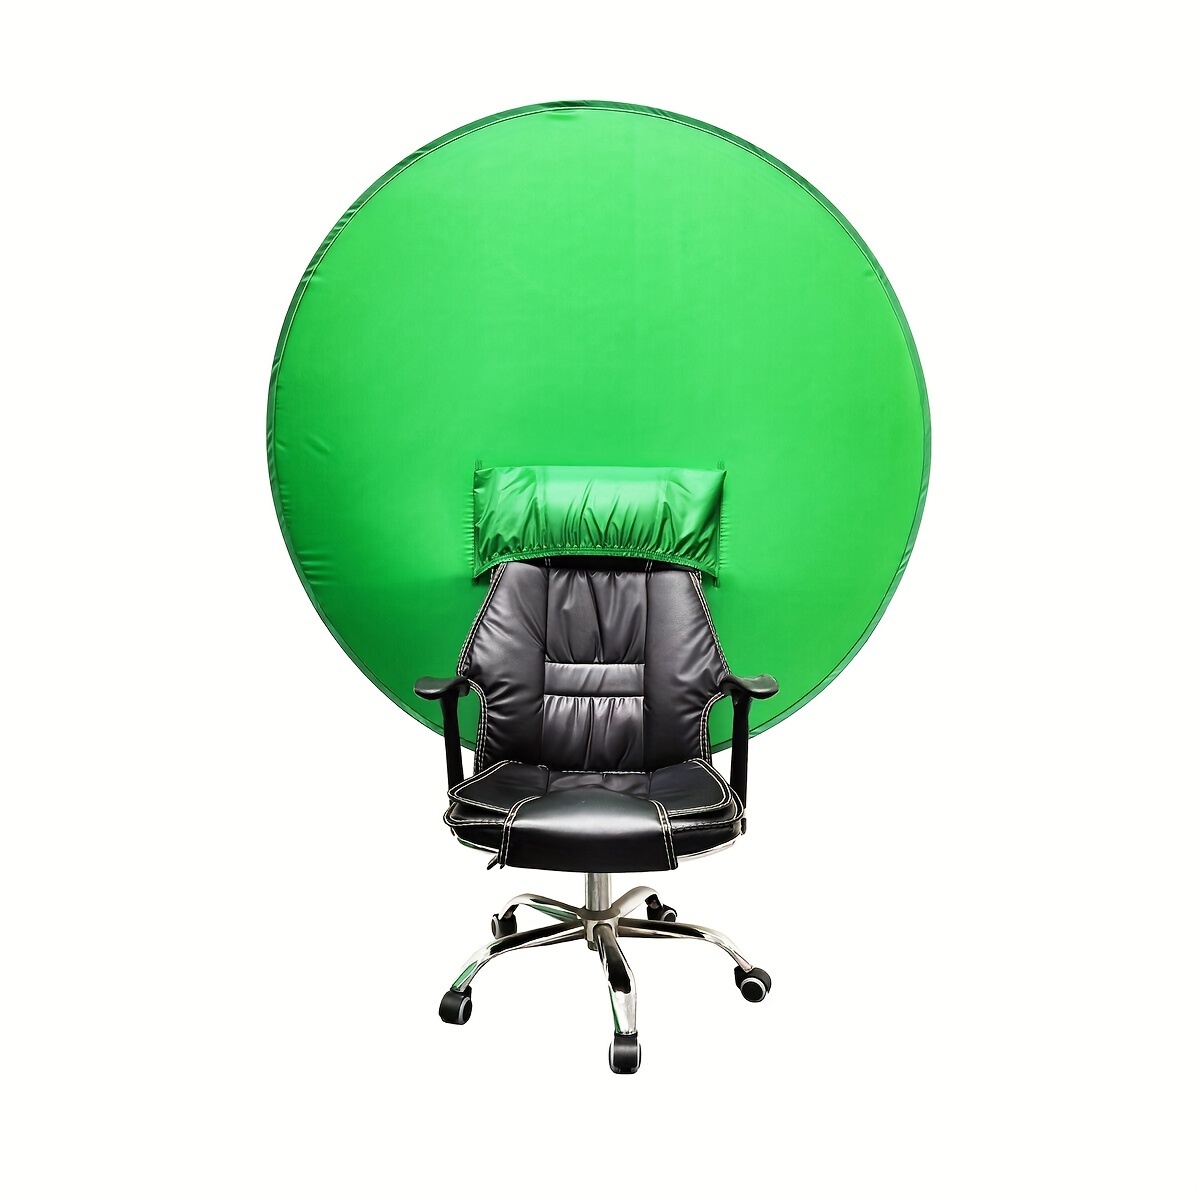 

Green Screen Backdrop Collapsible Video Studio Vlogging Streaming Background With Chair Mount